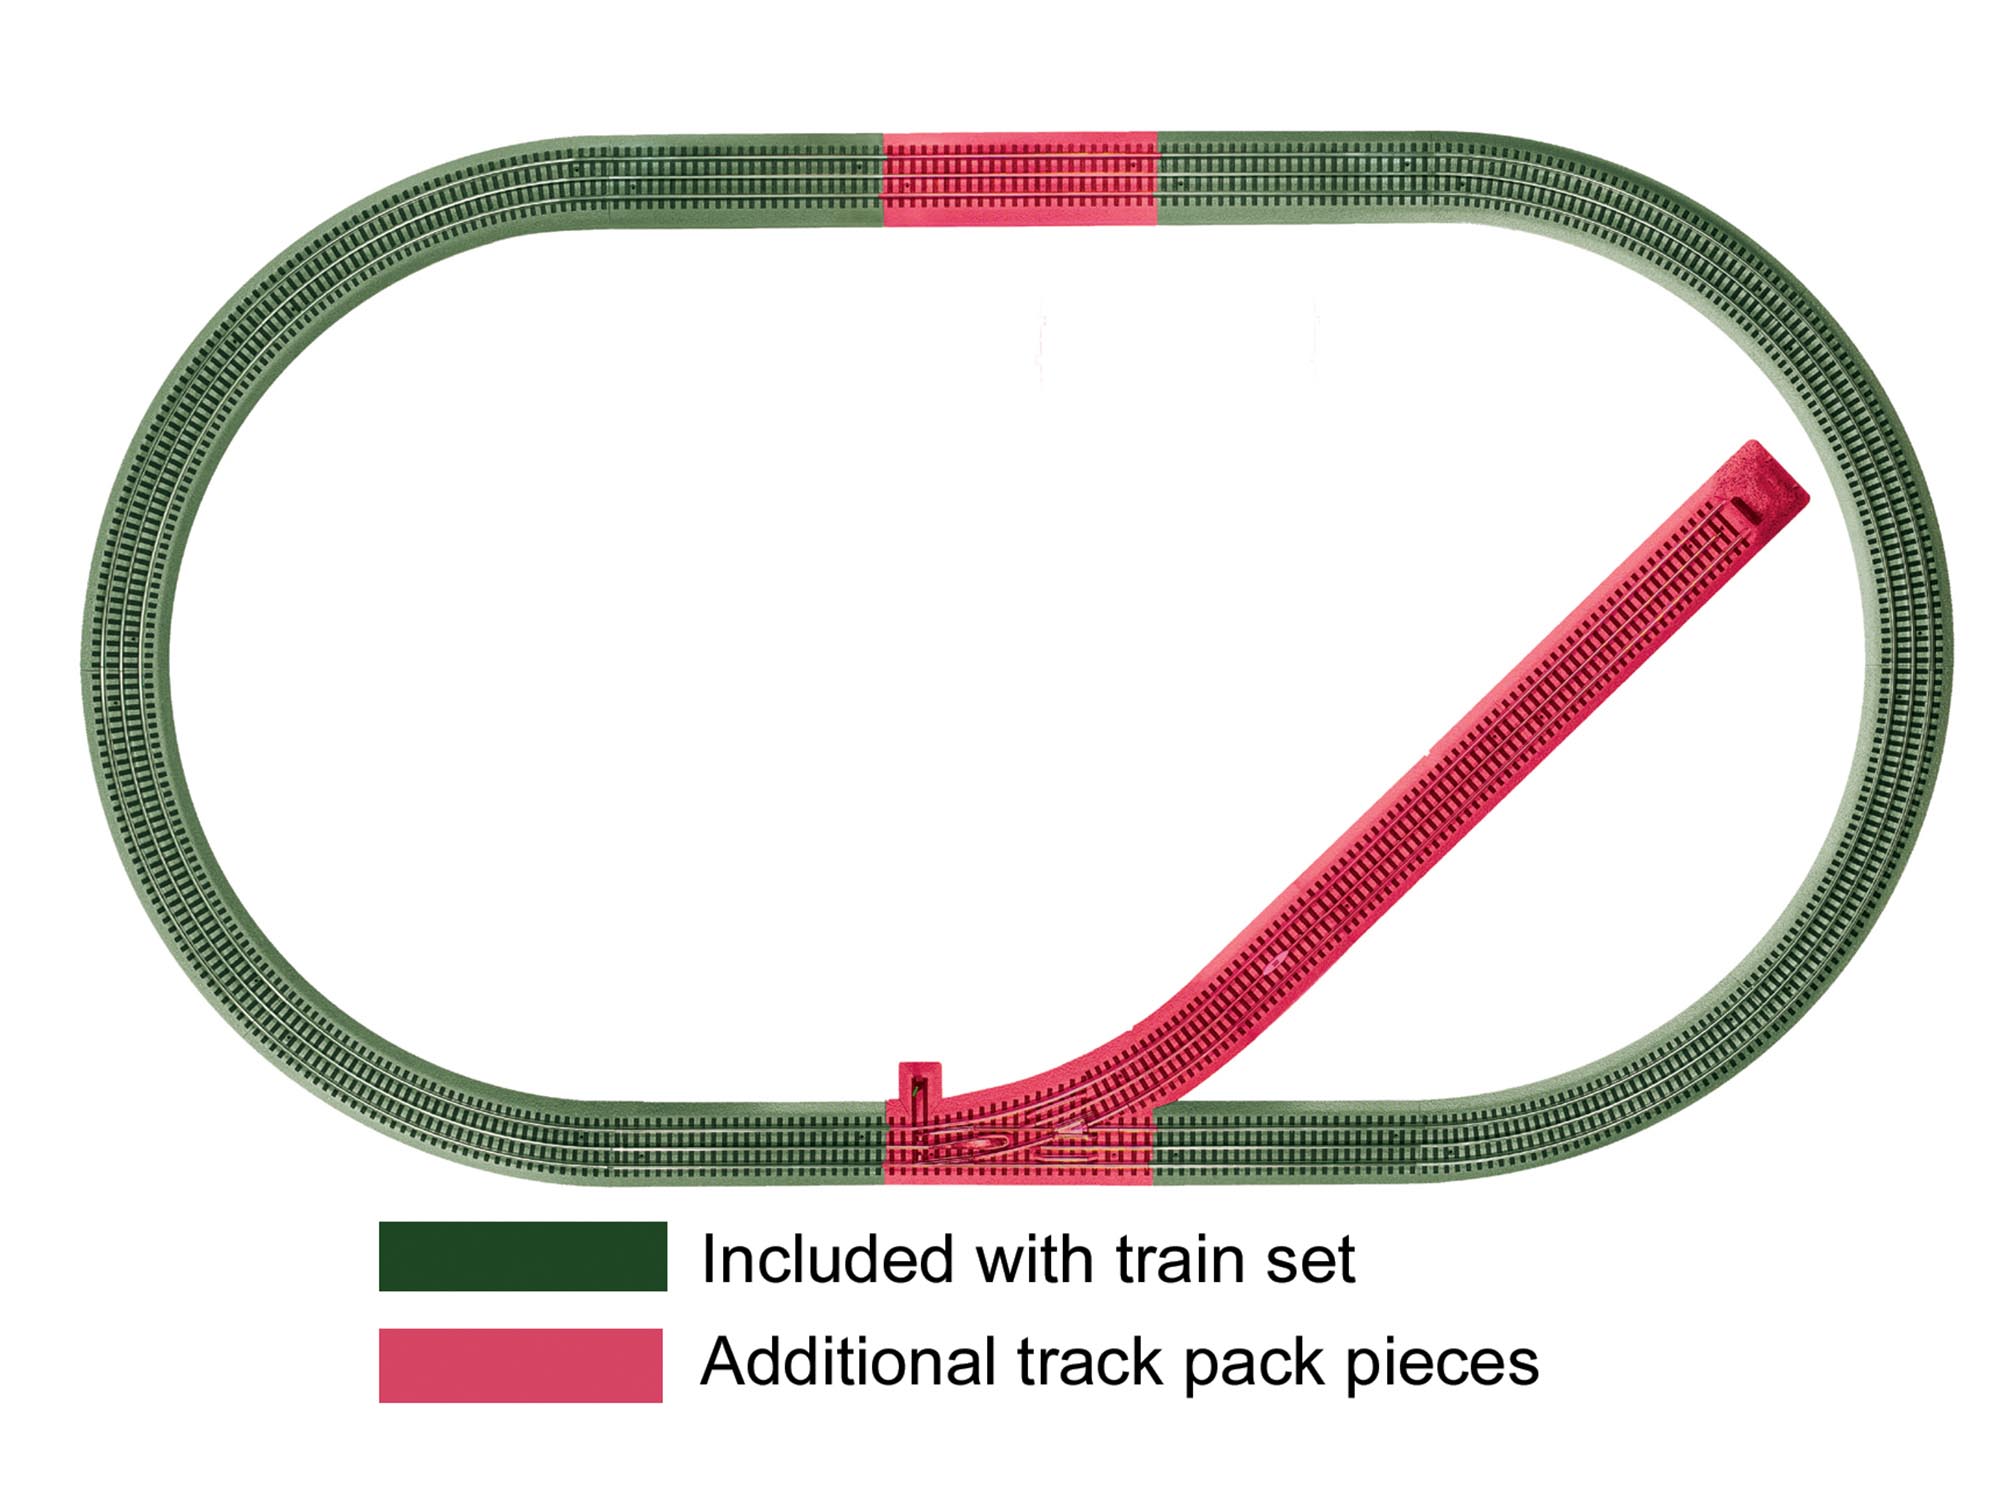 LIONEL DELUXE TRAIN TRACK PACK for FASTRACK 5x10 Feet layout straight curve NEW 